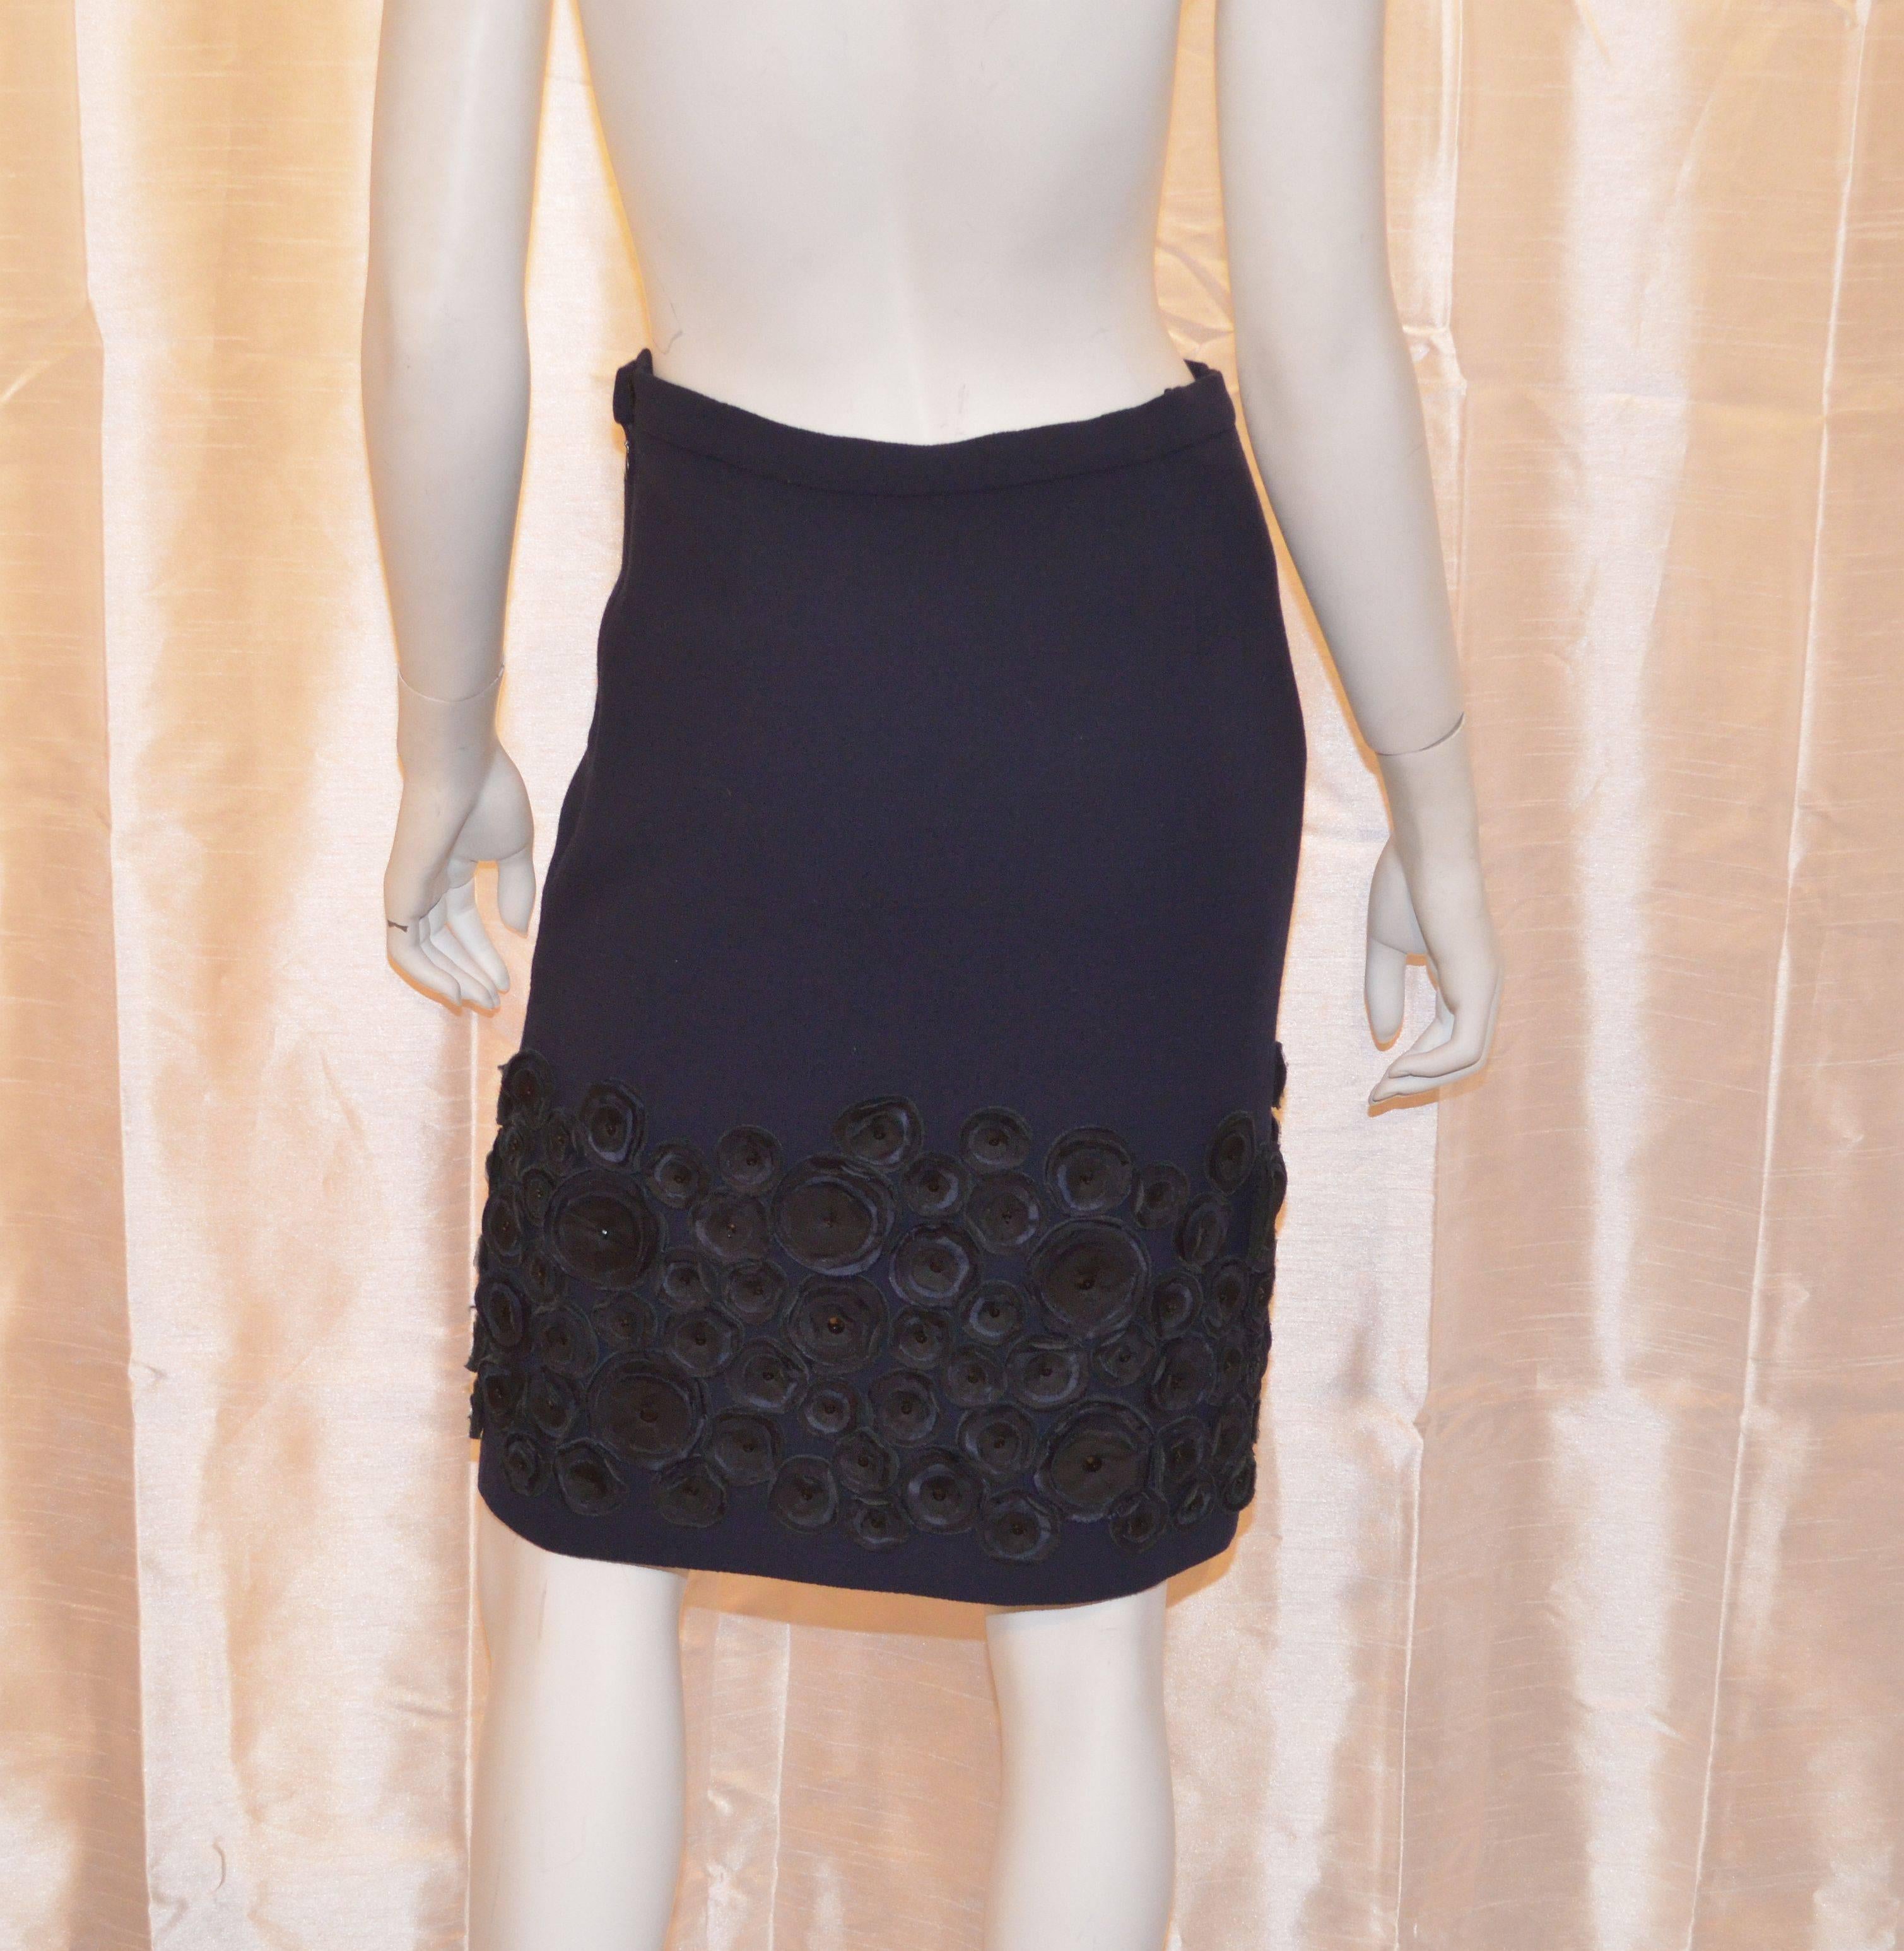 Skirt is 100% wool in a French navy blue color with black silk embellishing along the hem, side zipper and hook-and-eye closure, and fully lined in 100% silk. Size 4, Made in USA.

Measurements:
Waist - 26''
Hips - 35''
Length - 22''